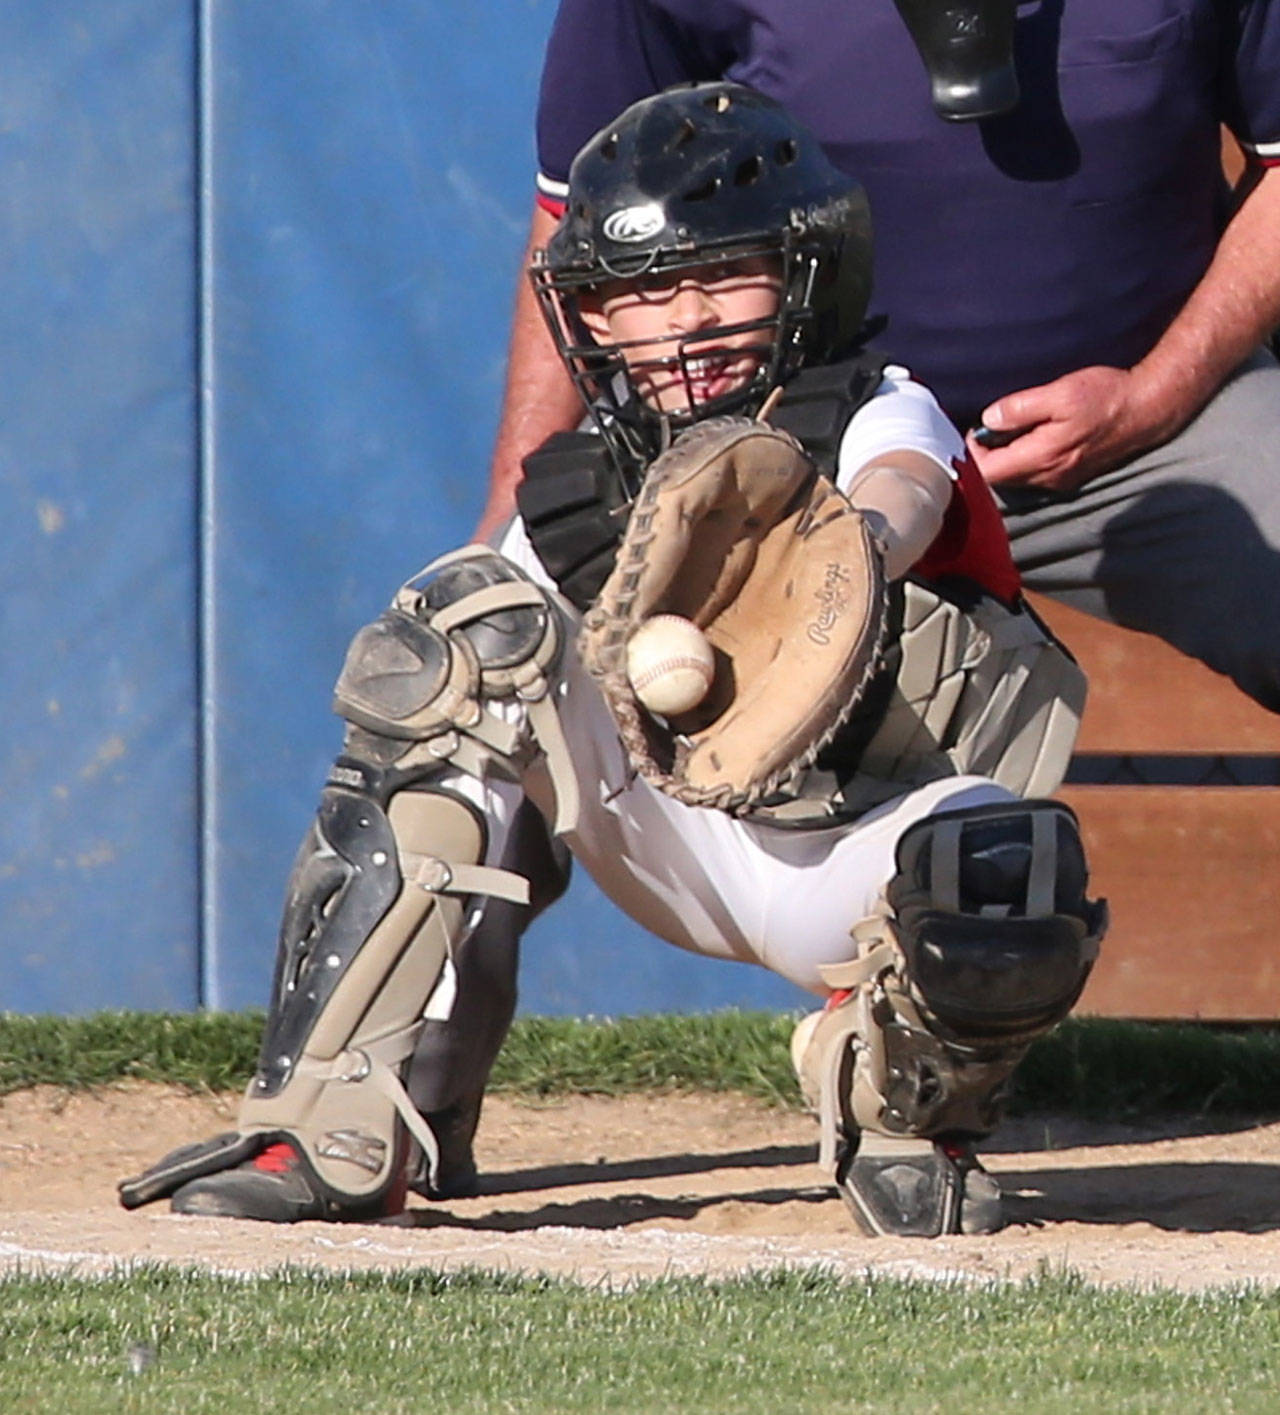 Central Whidbey catcher Chase Anderson looks in a pitch. (Photo by John Fisken)